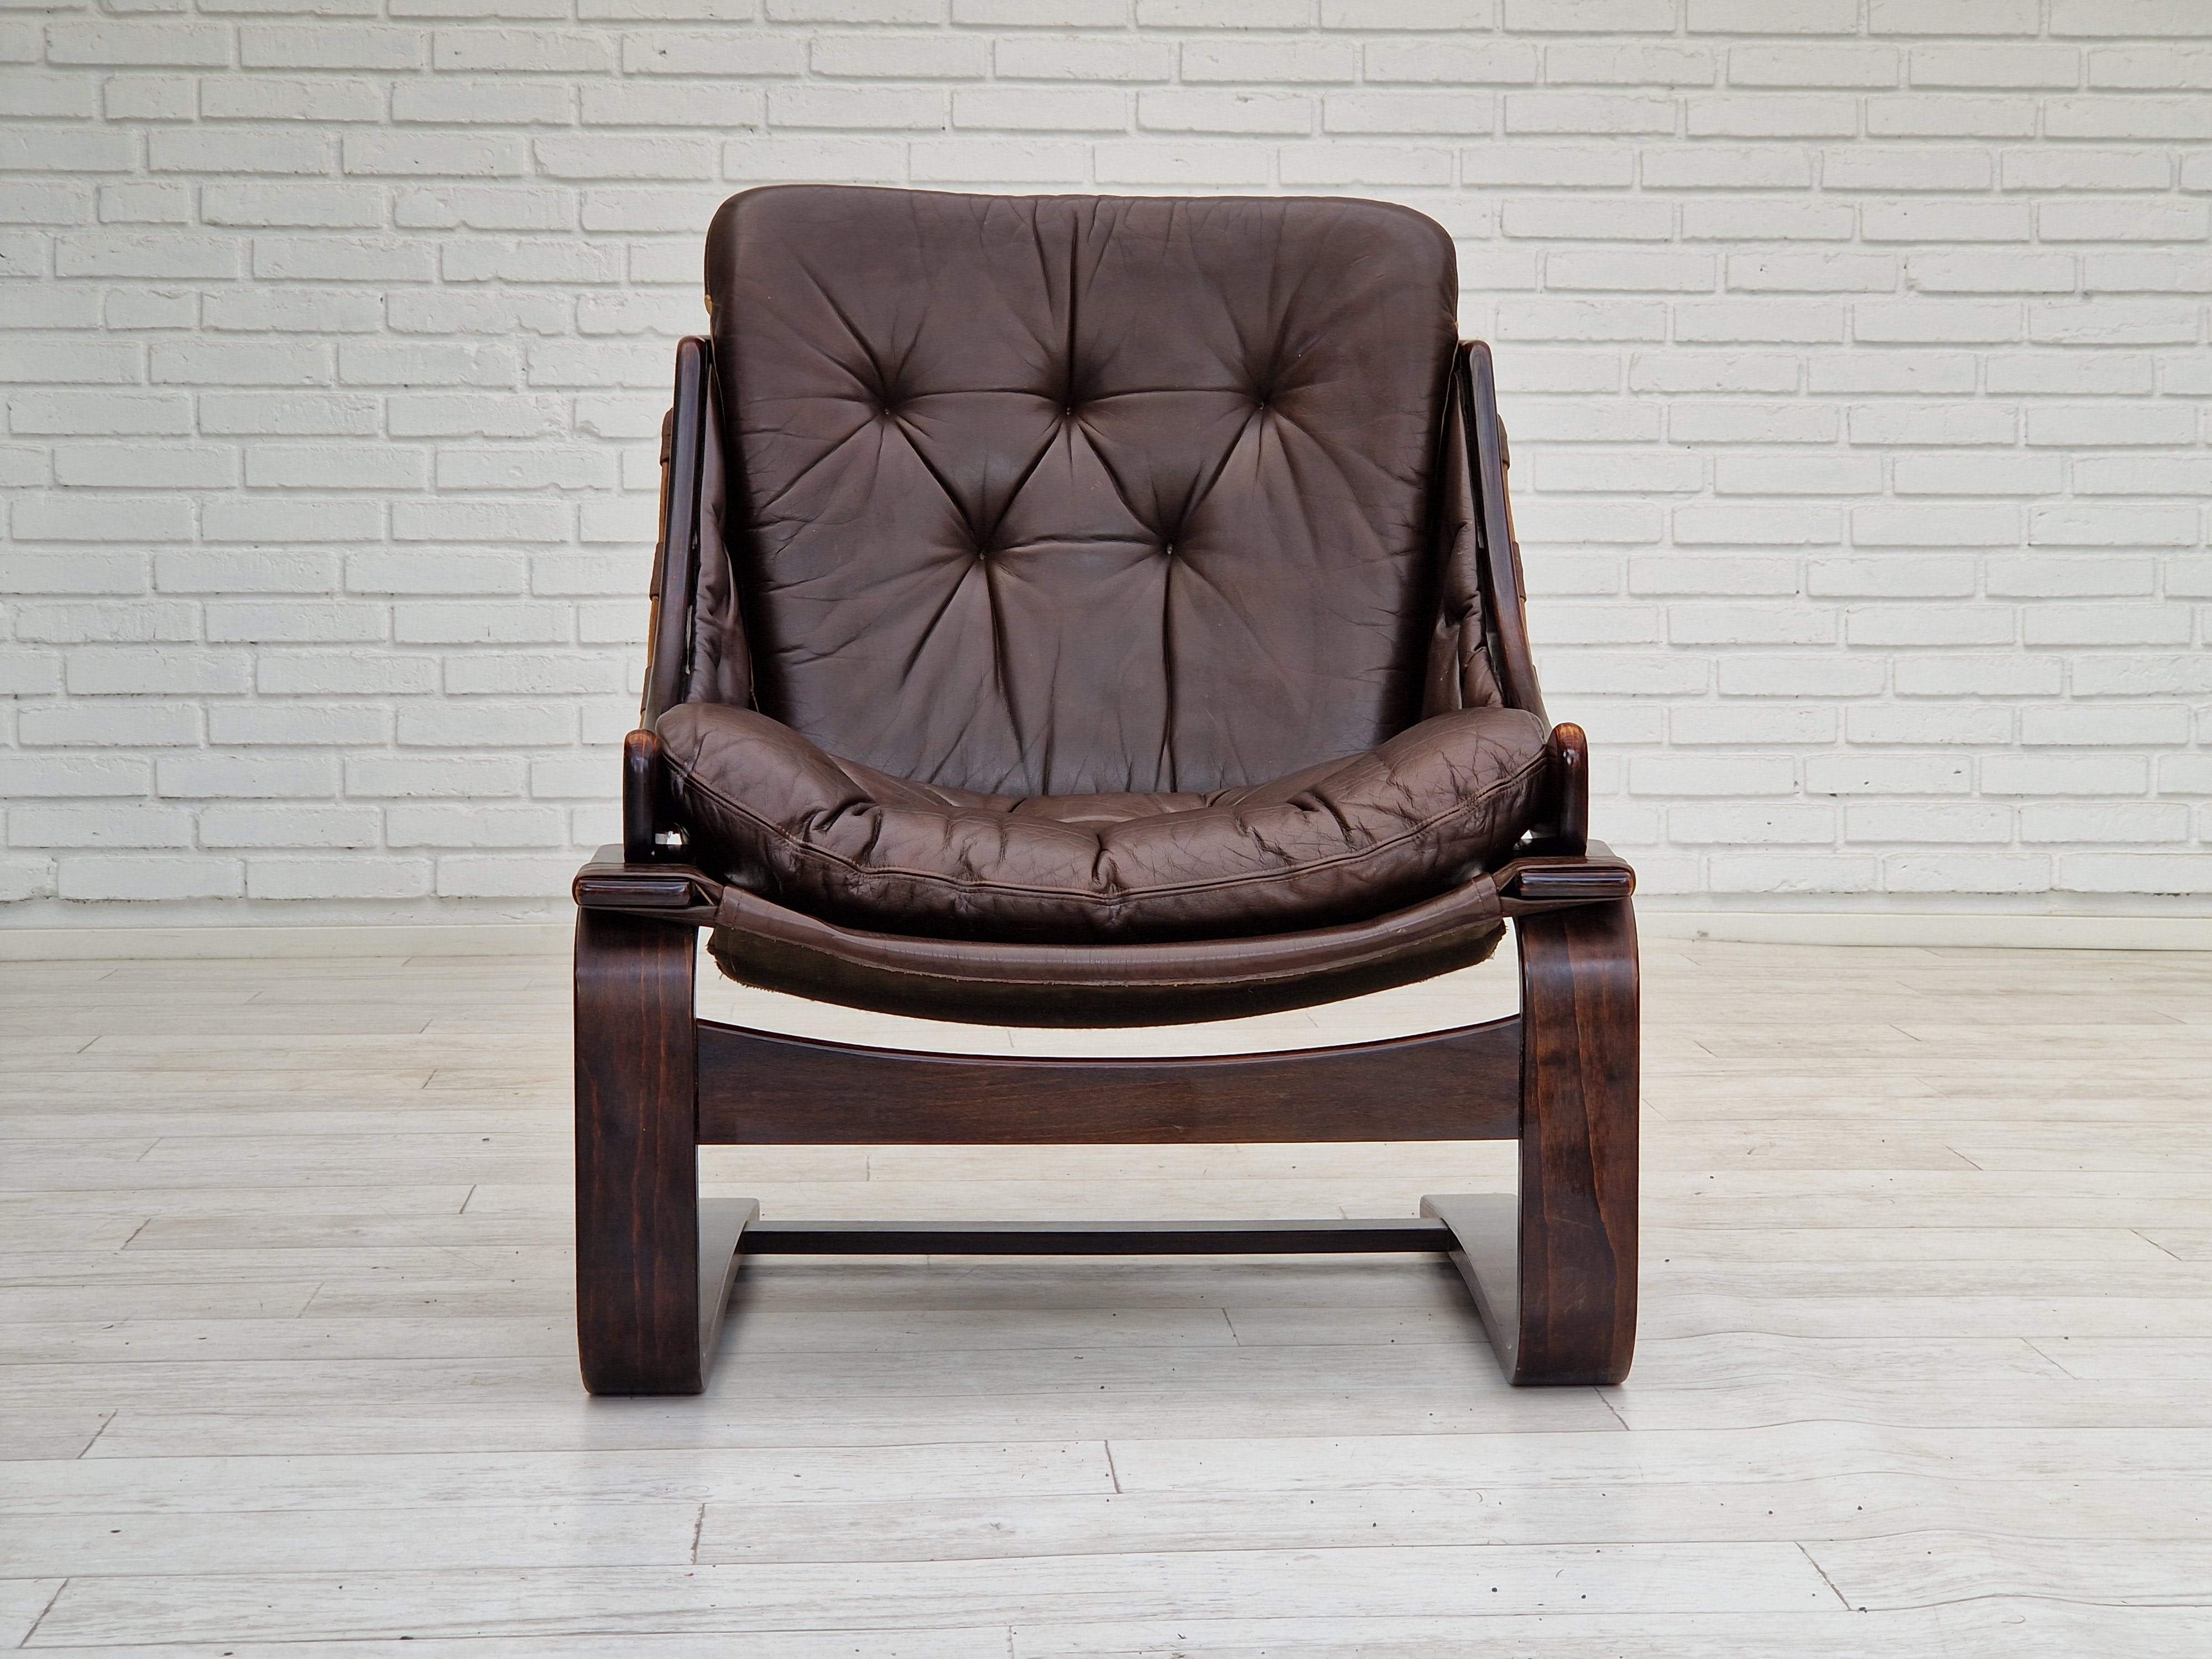 1970s, Brown leather lounge chair by Ake Fribytter for Nelo Sweden. Original very good condition: no smells and no stains. Loose cushions in brown leather, dark brown plywood, brown canvas fabric, natur leather straps.